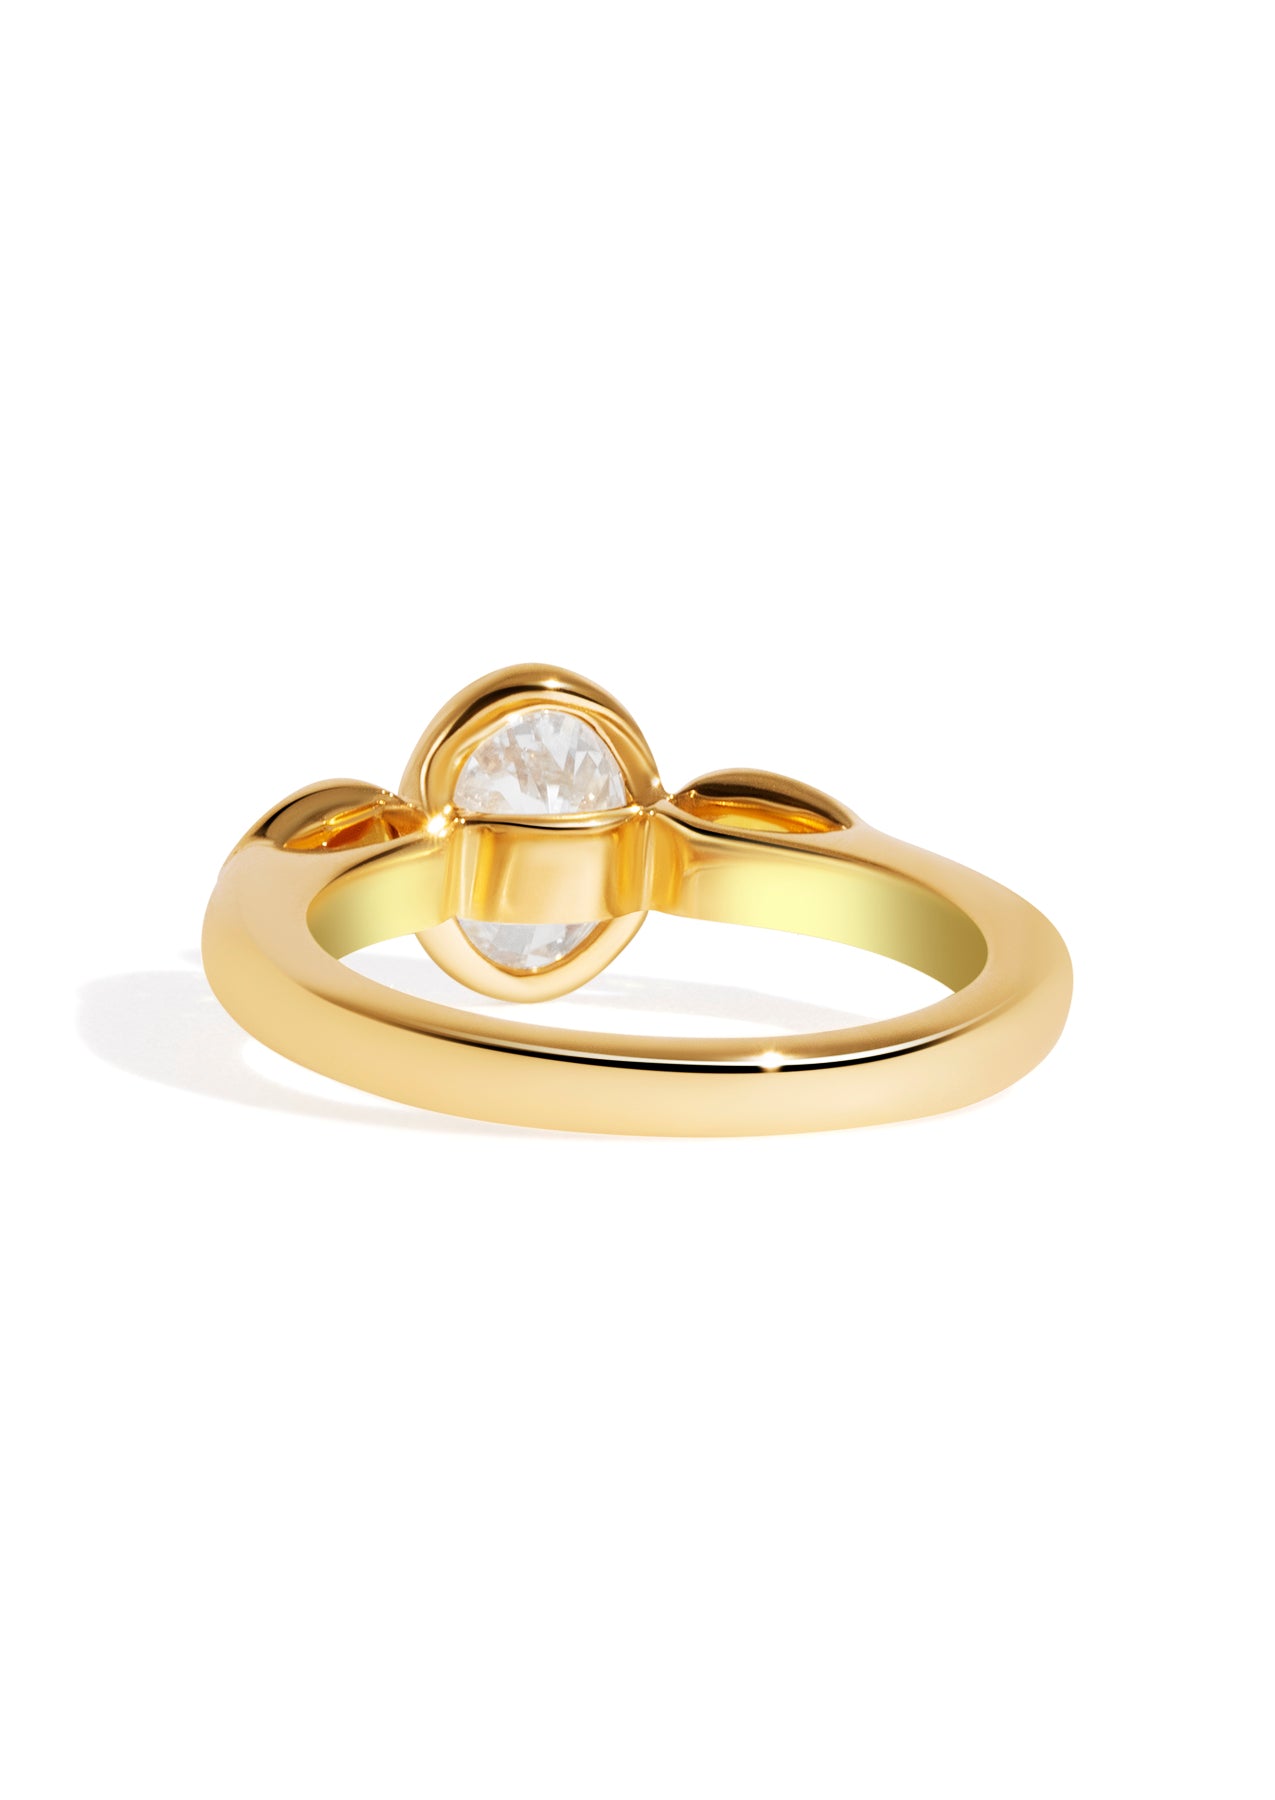 The Beatrice Ring with 1ct Cultured Diamond